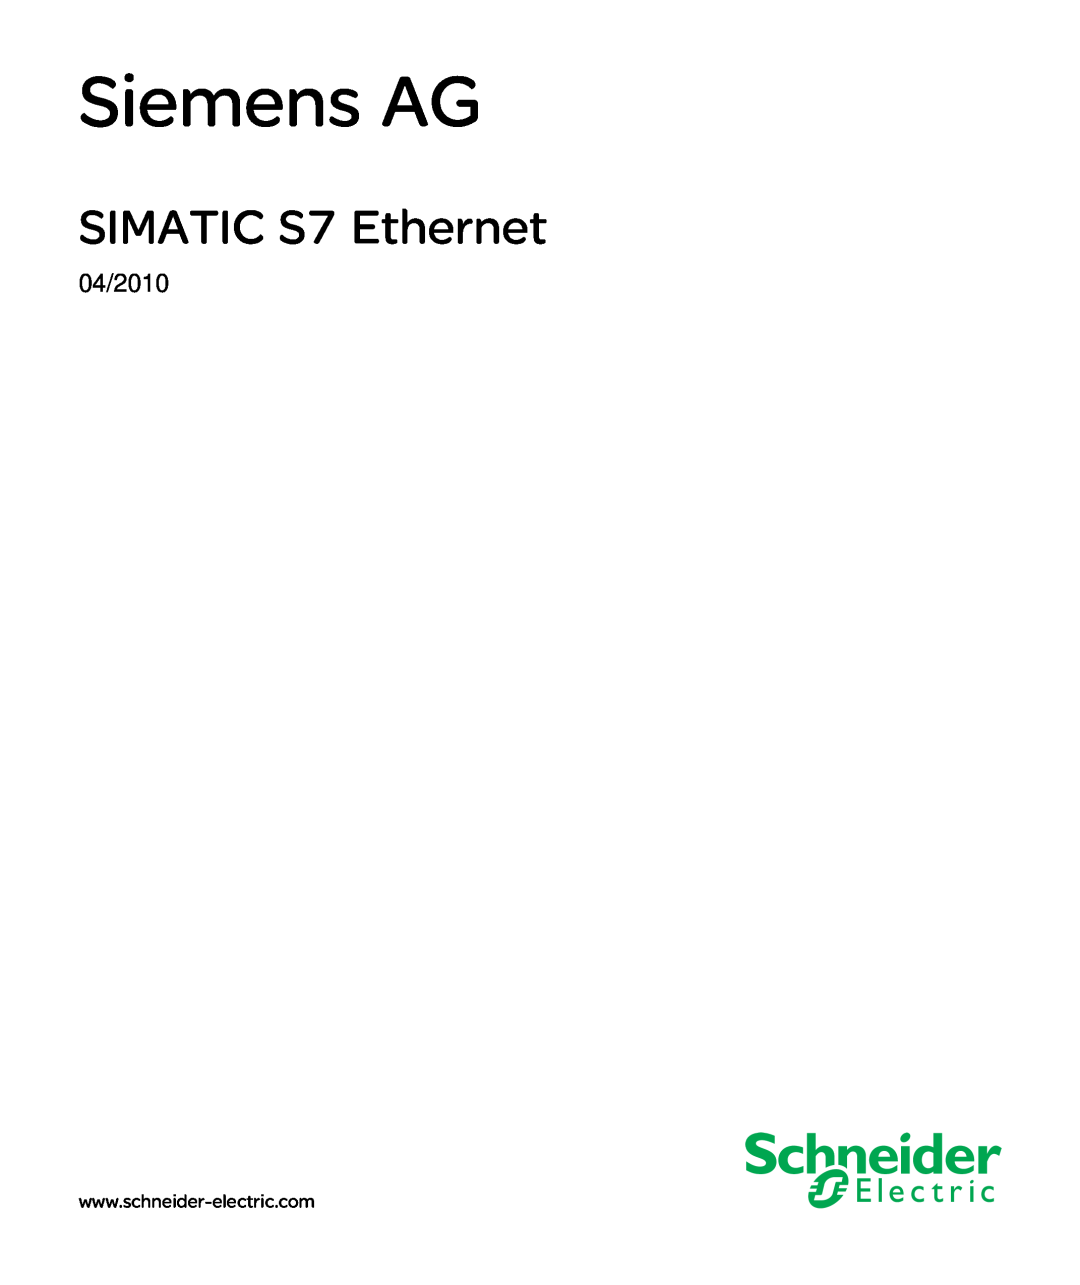 Schneider Electric manual Siemens AG, SIMATIC S7 Ethernet, 04/2010 